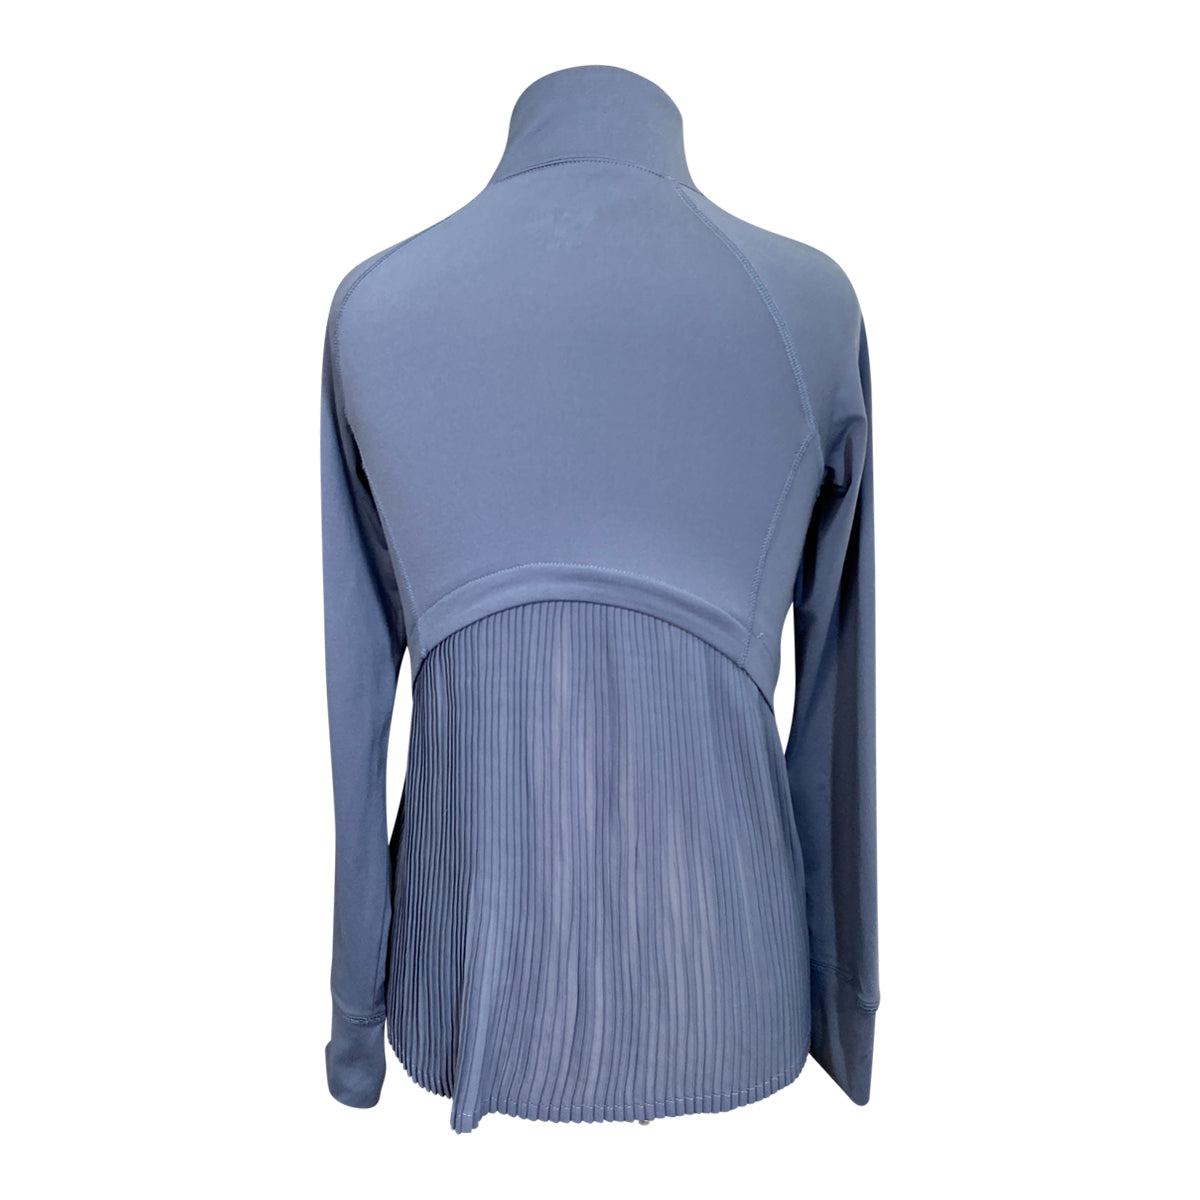 Dover Saddlery Pleated Back Shirt in Powder Blue